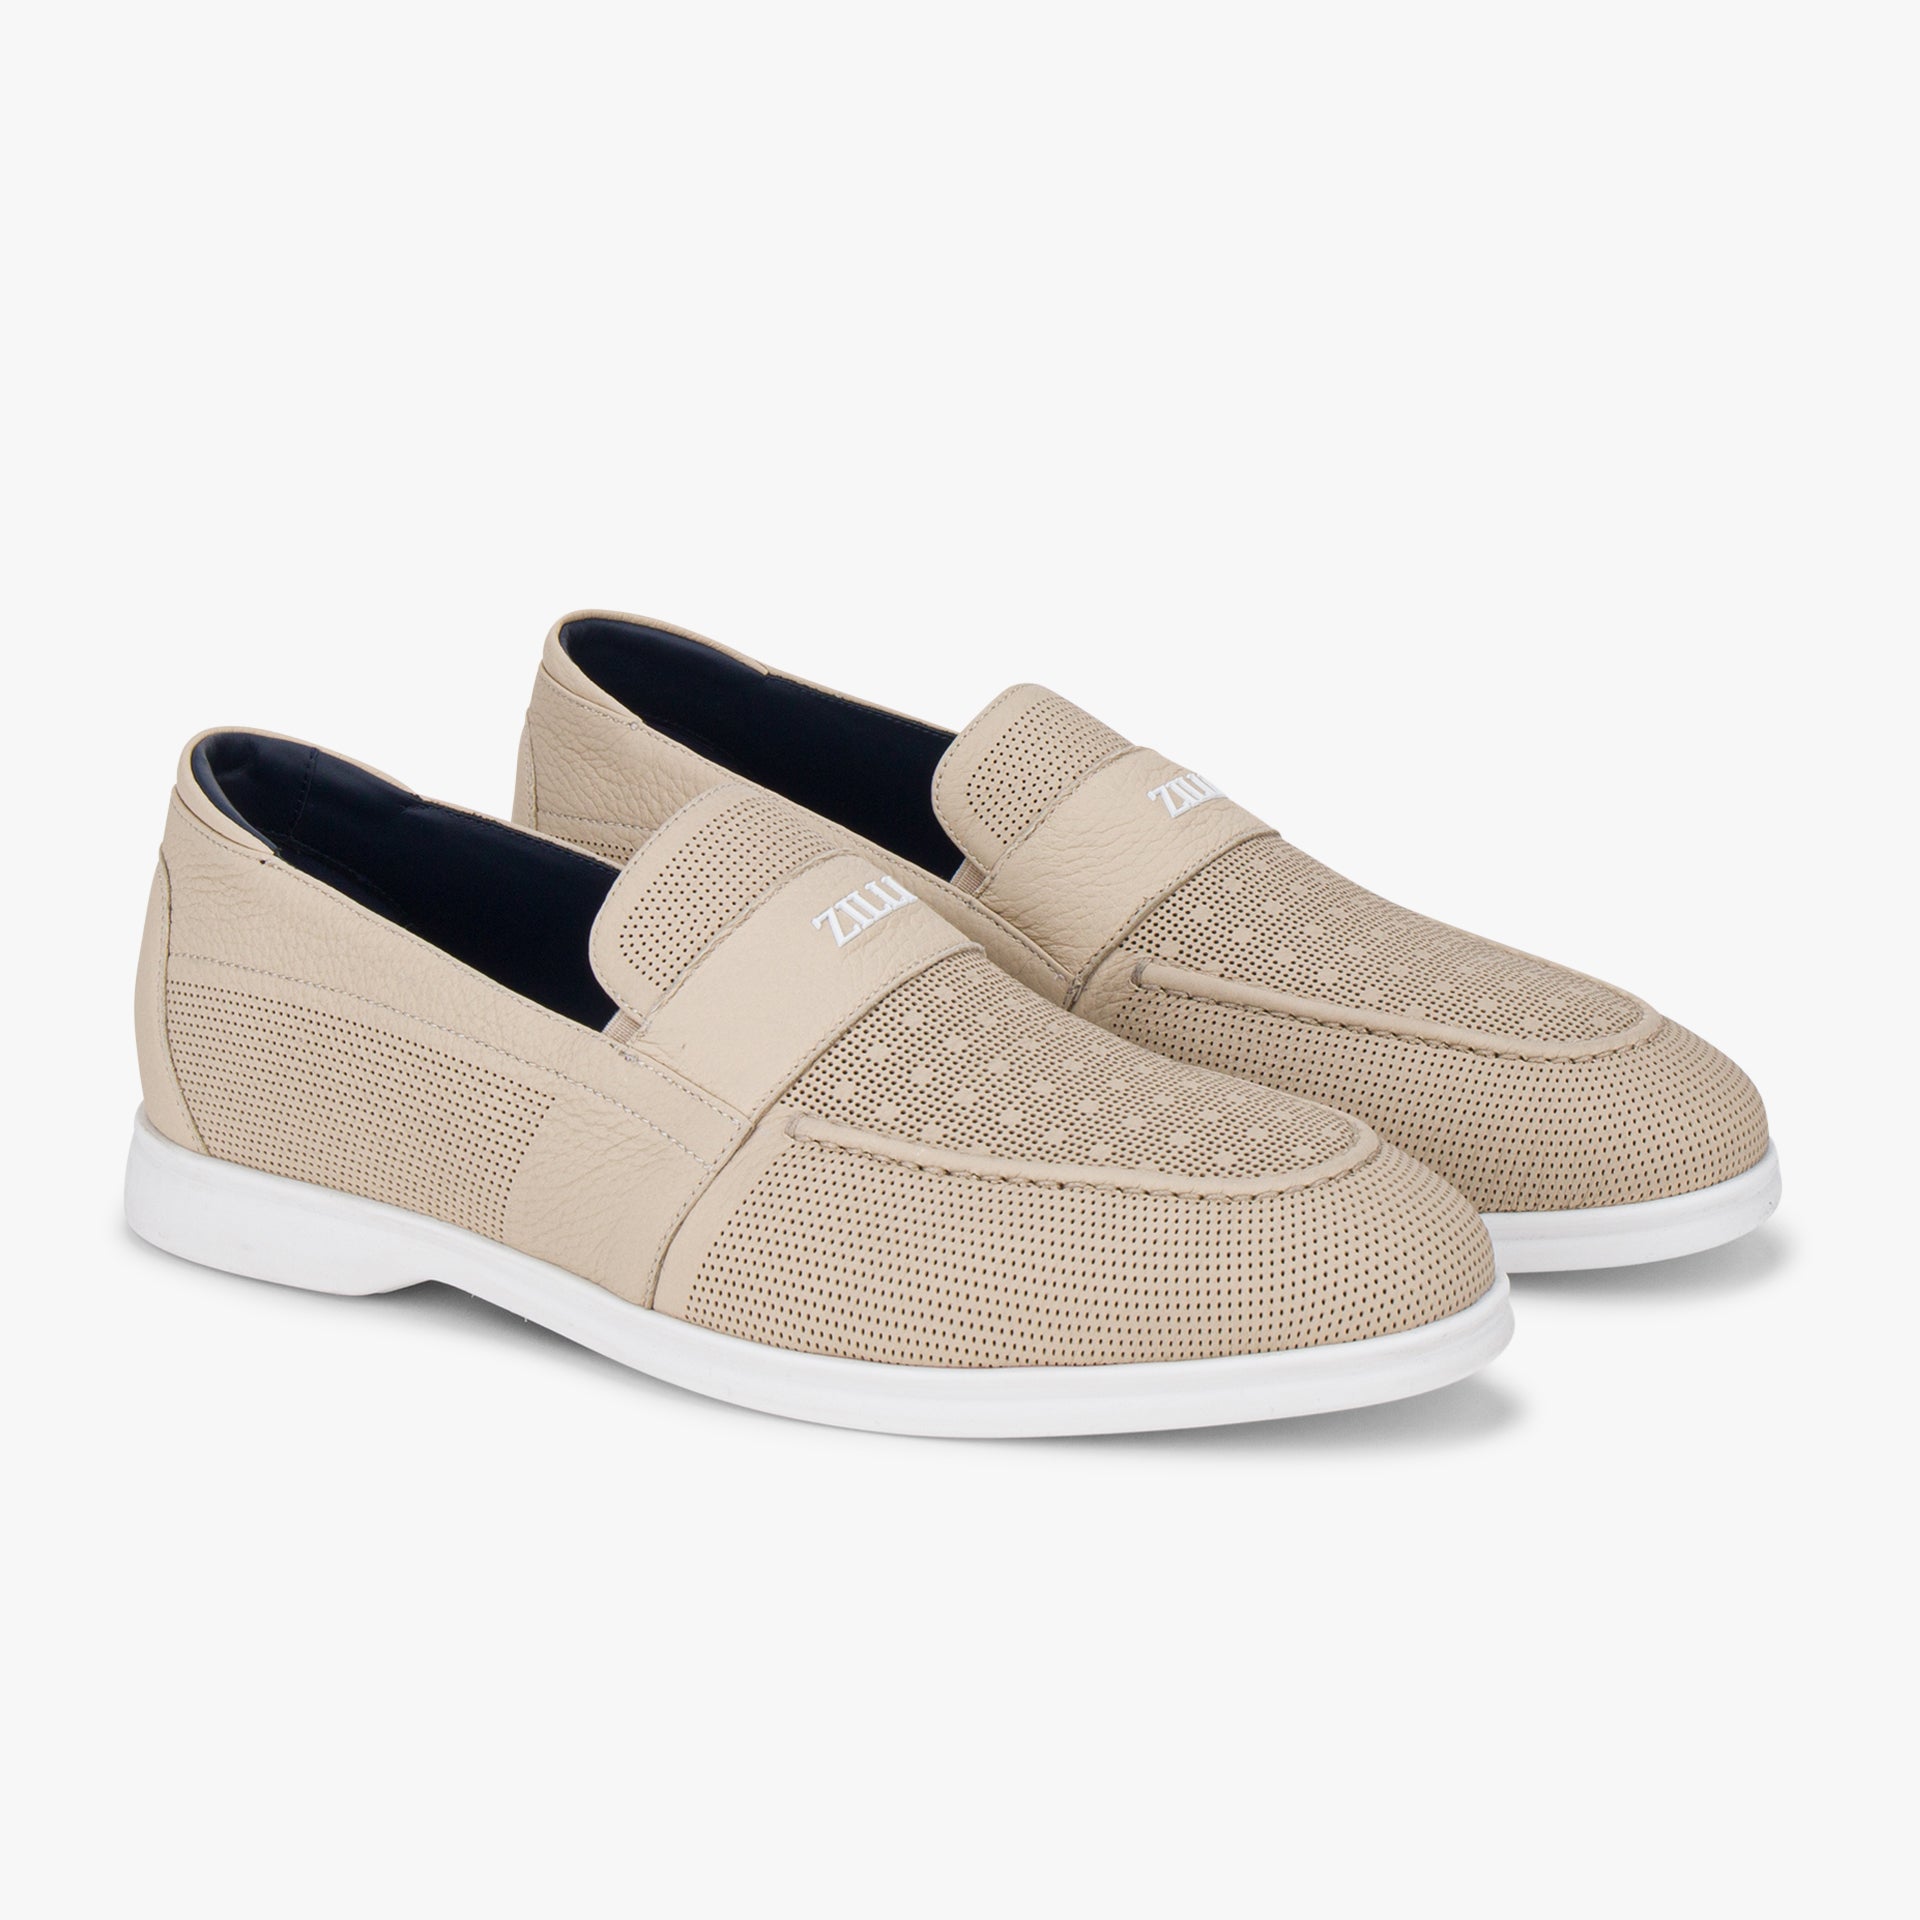 Perforated Moccasin